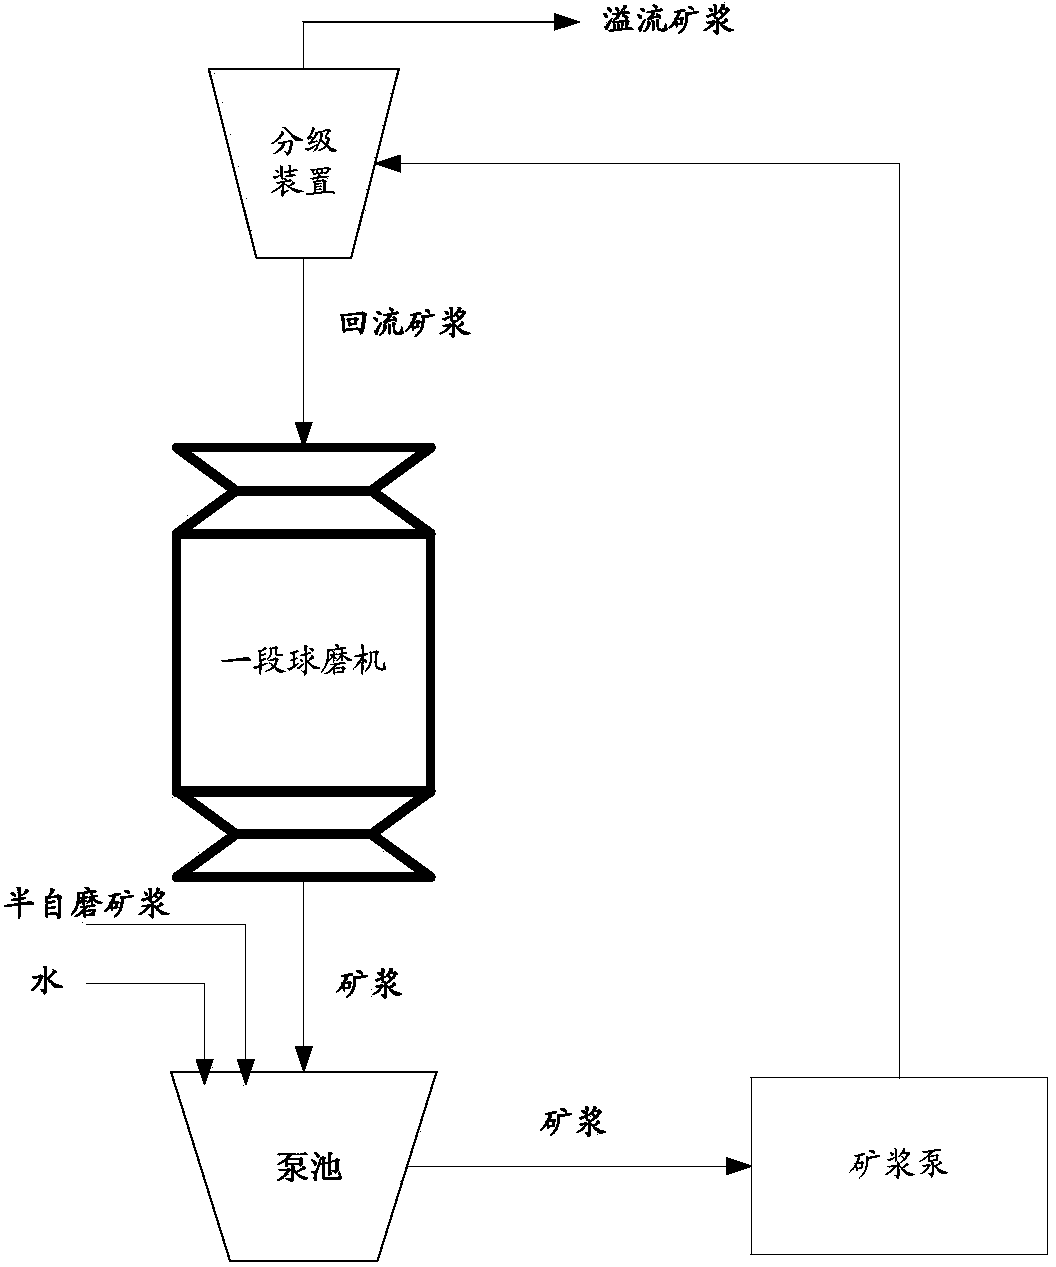 Method and device for controlling liquid level of ore pulp pump pool in ore grinding classification